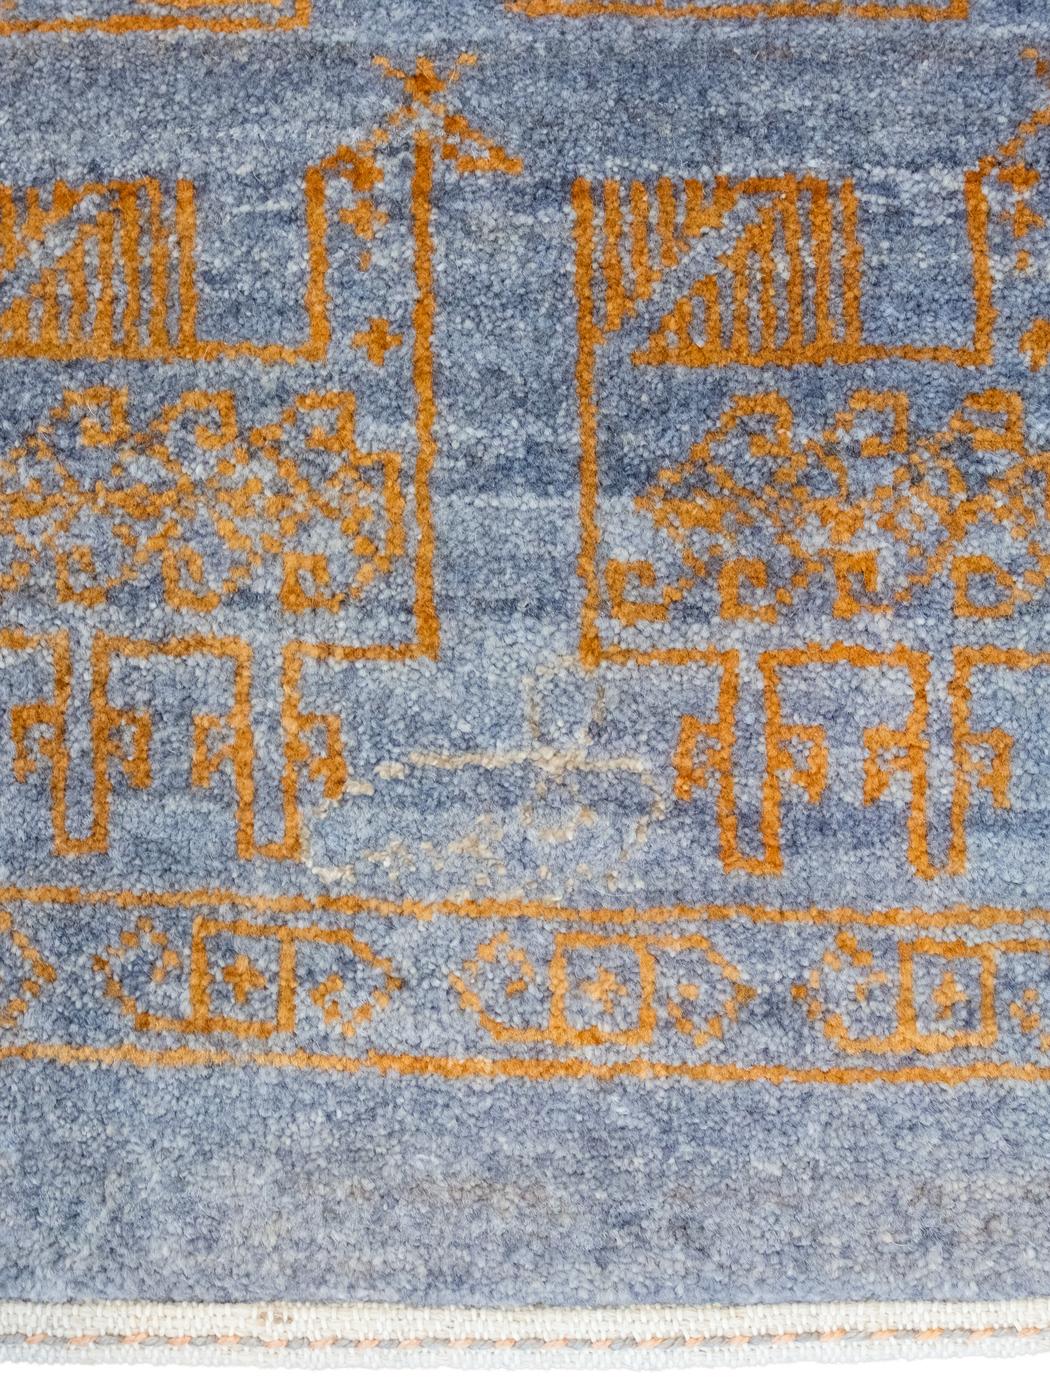 Orley Shabahang, Orange and Gray Modern Peacock Carpet, Wool, 9' x 12' In New Condition For Sale In New York, NY